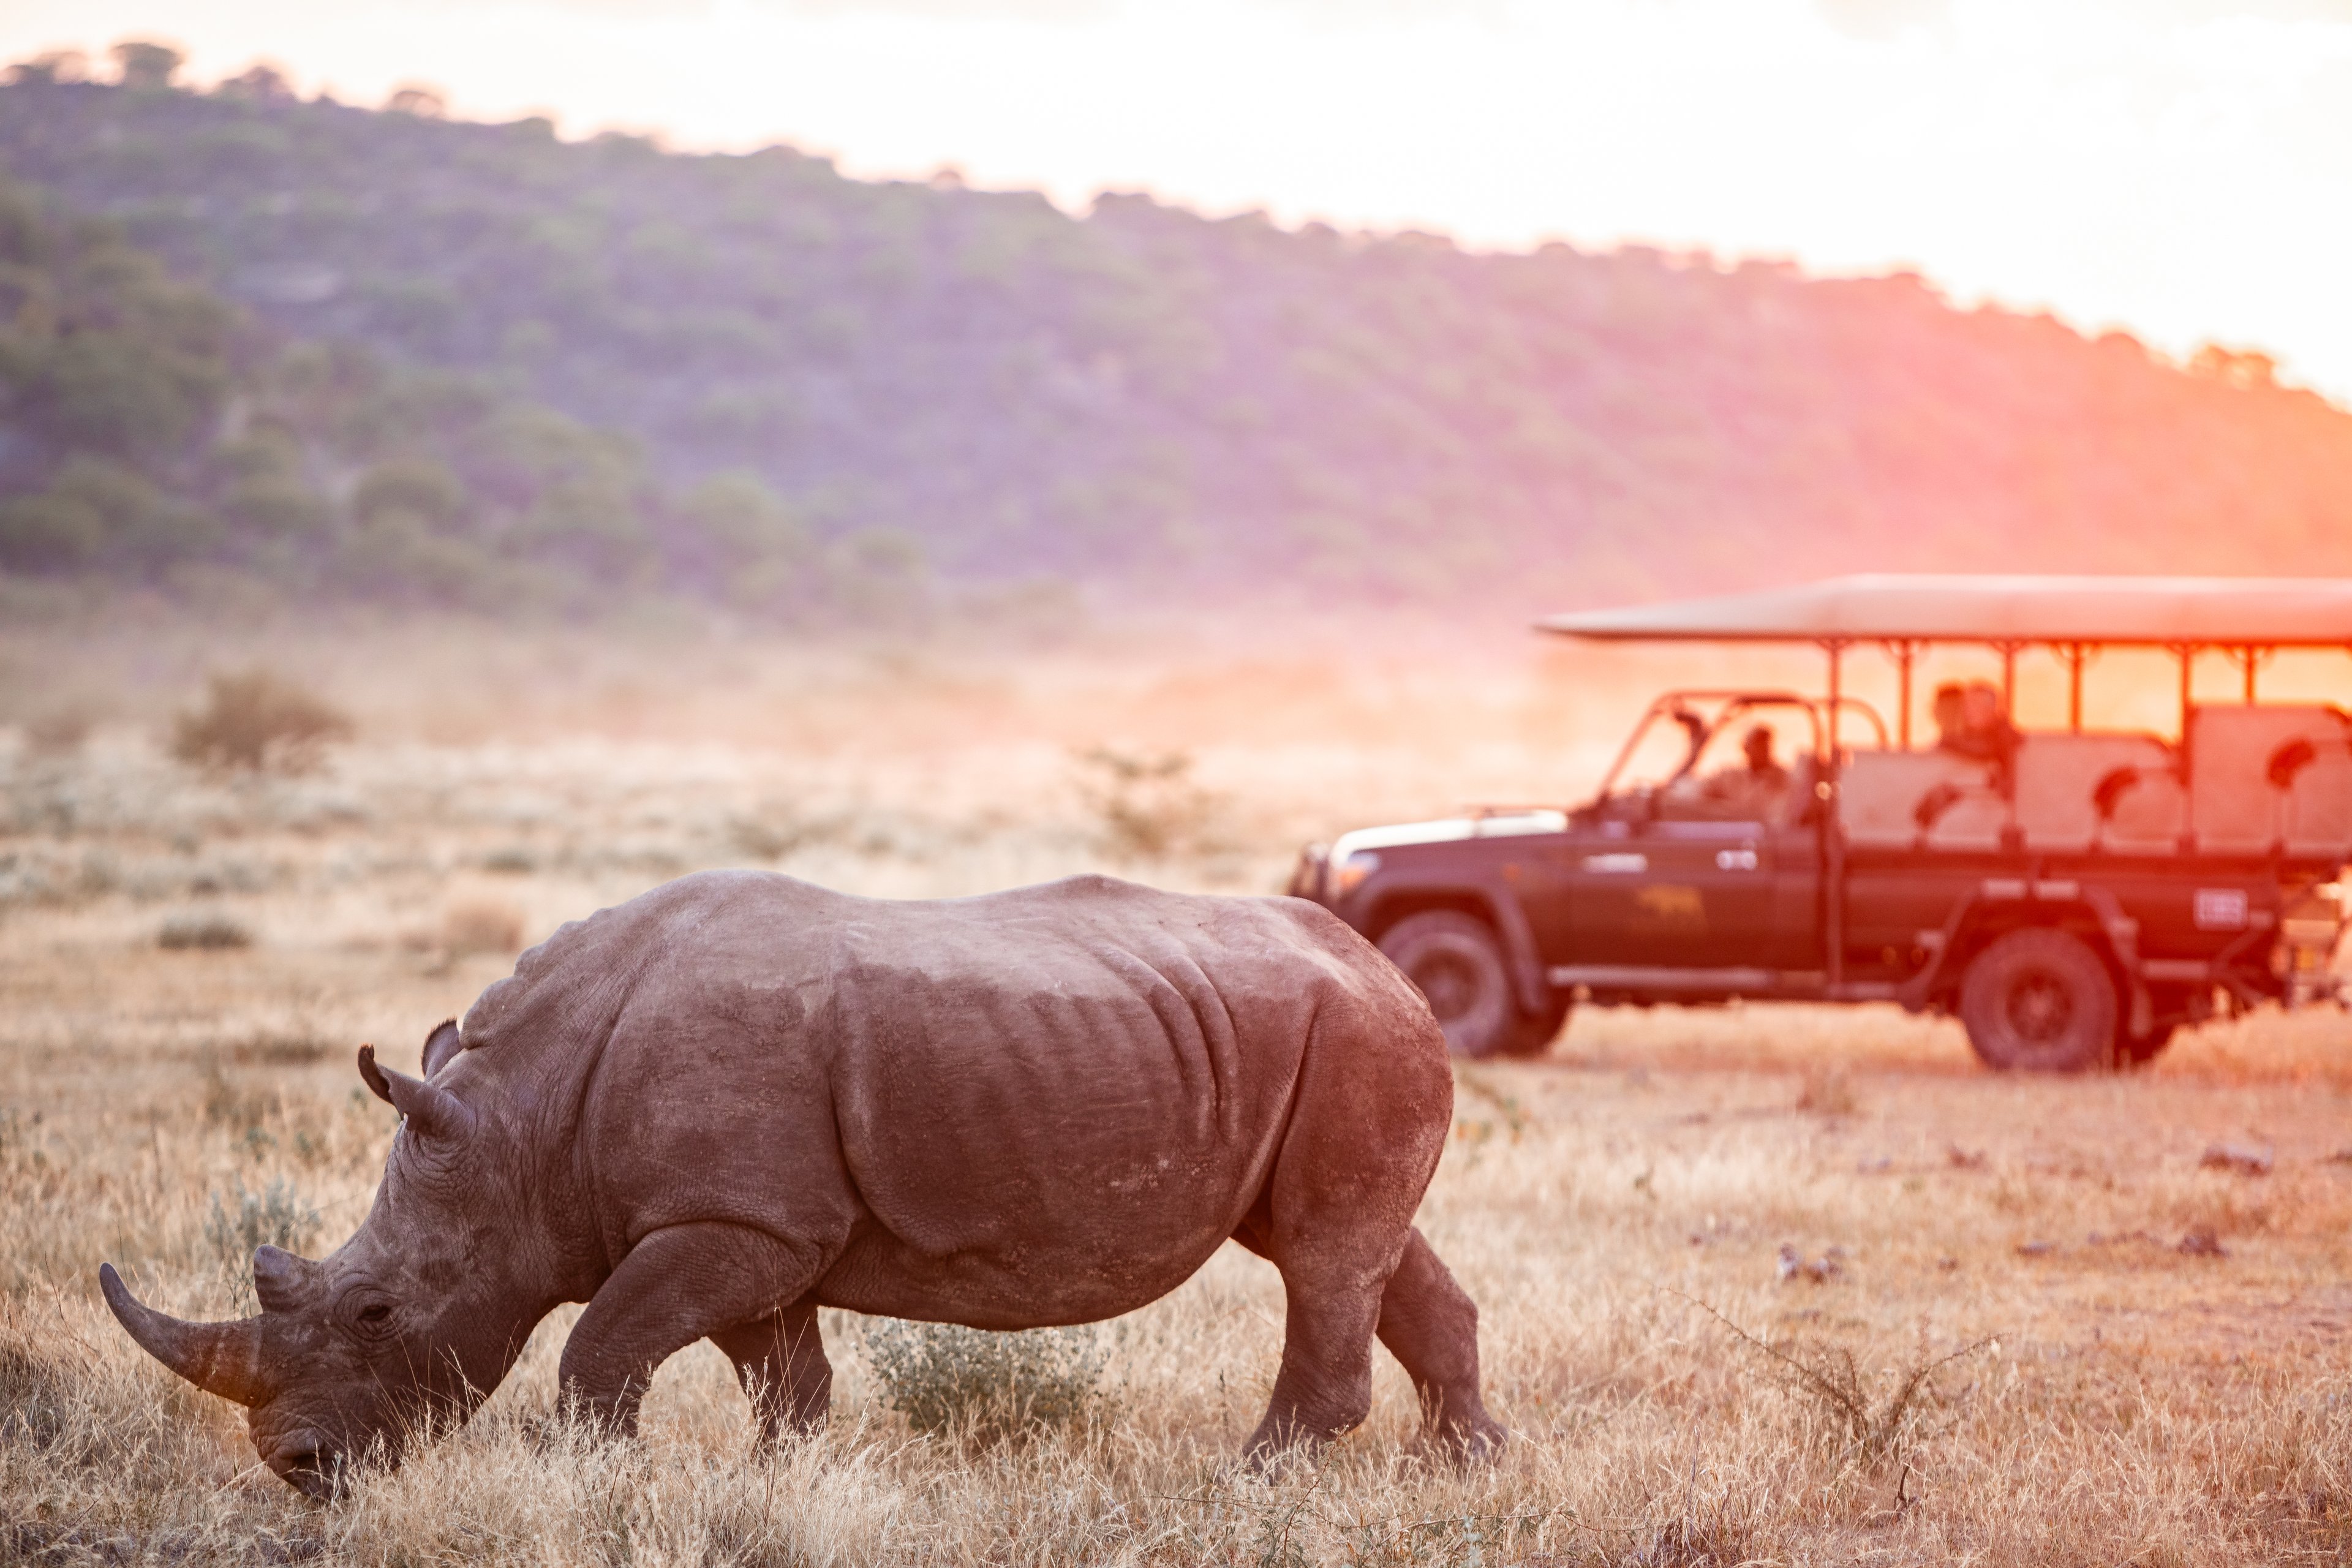 In the Realm of the Rhino, a close-up encounter sets the senses a-tingle at the wonder of nature on the move.